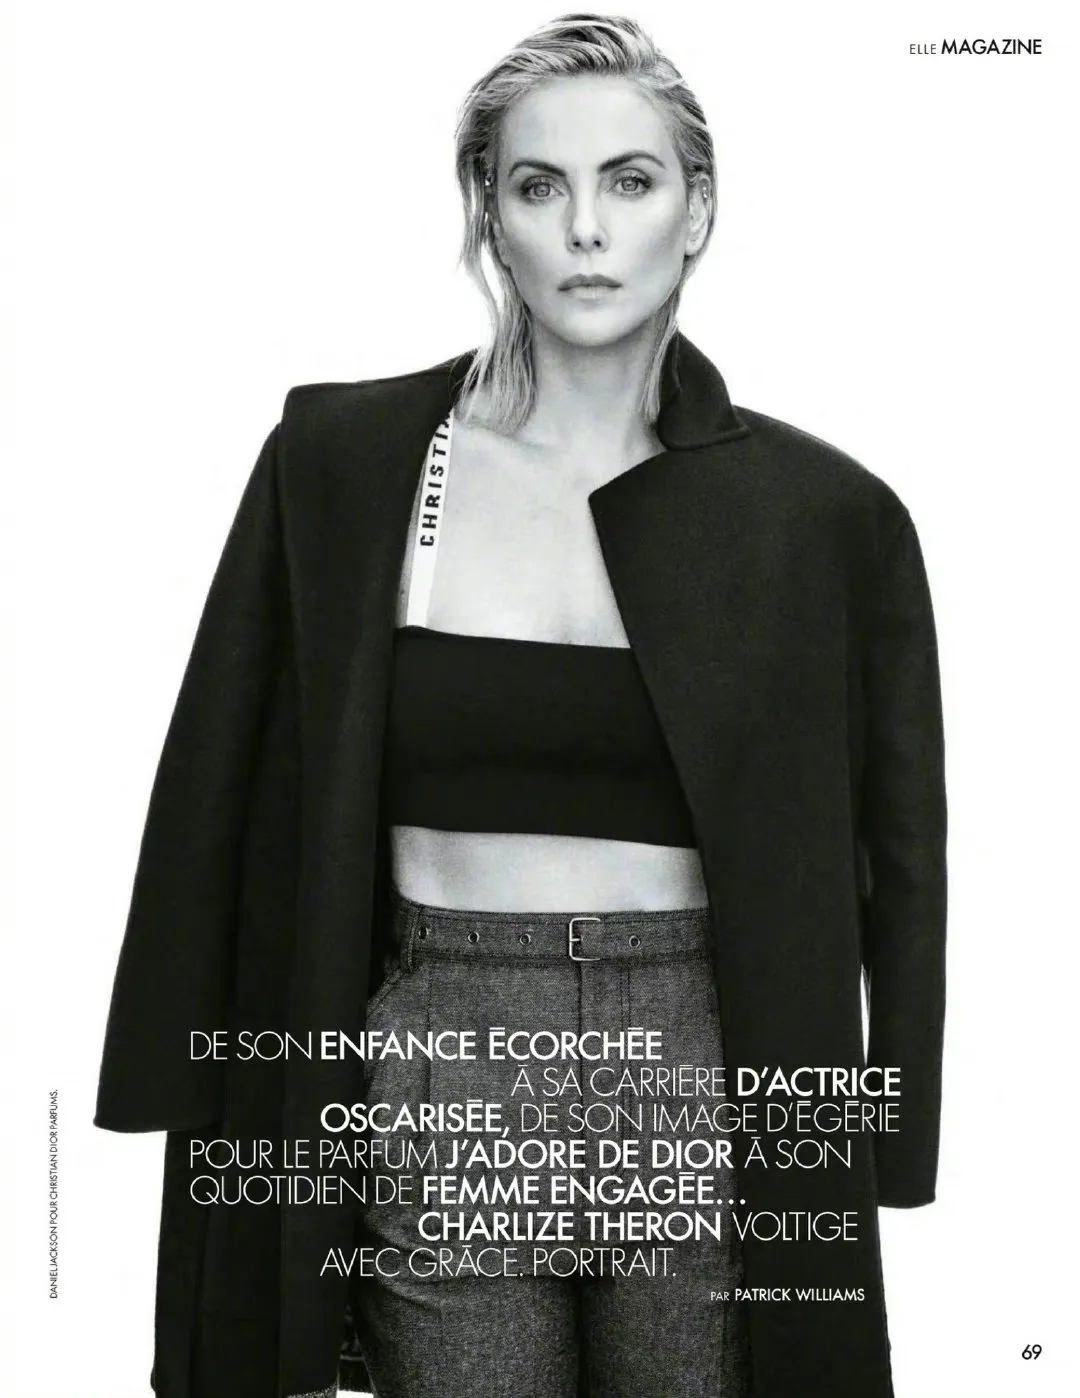 Charlize Theron, September photo of 'ELLE' French edition | FMV6